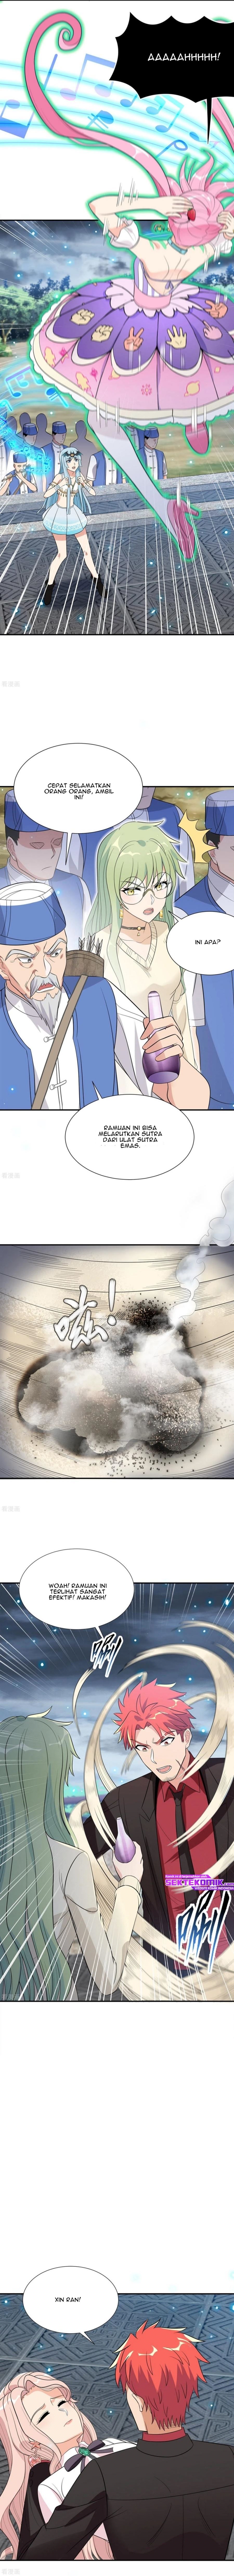 Dianfeng Chapter 87 11